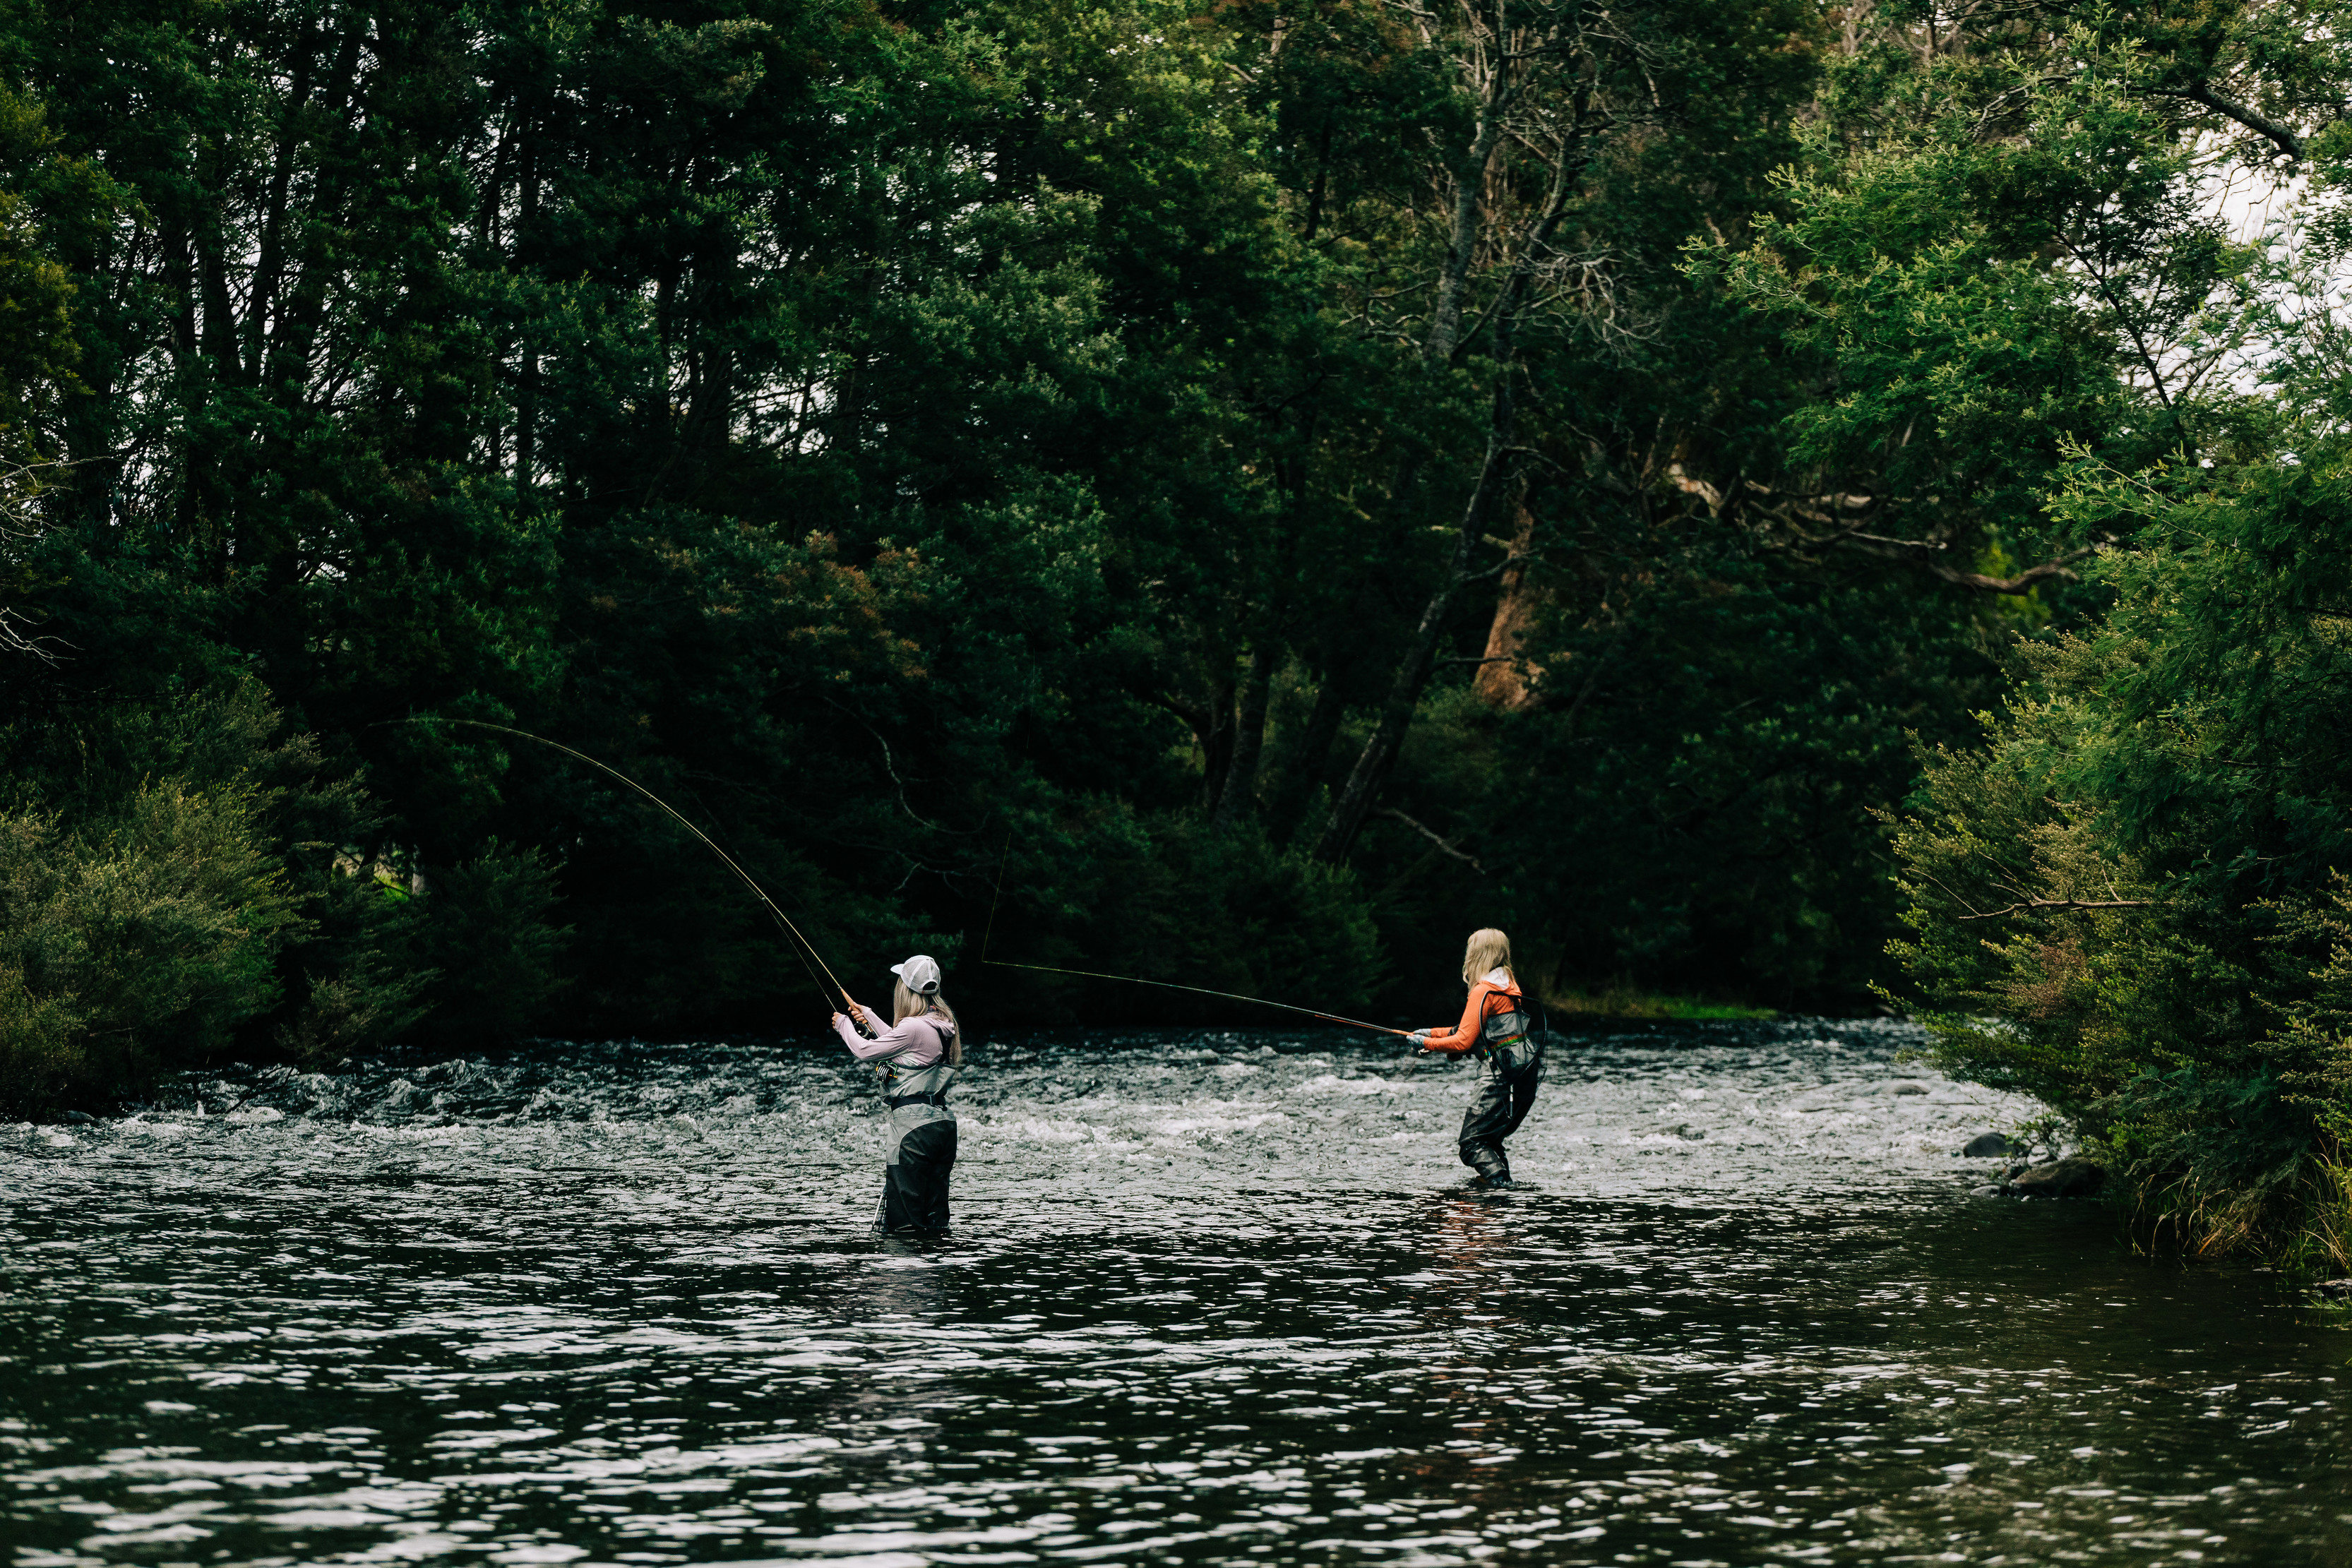  Fly fishing on the Meander River 